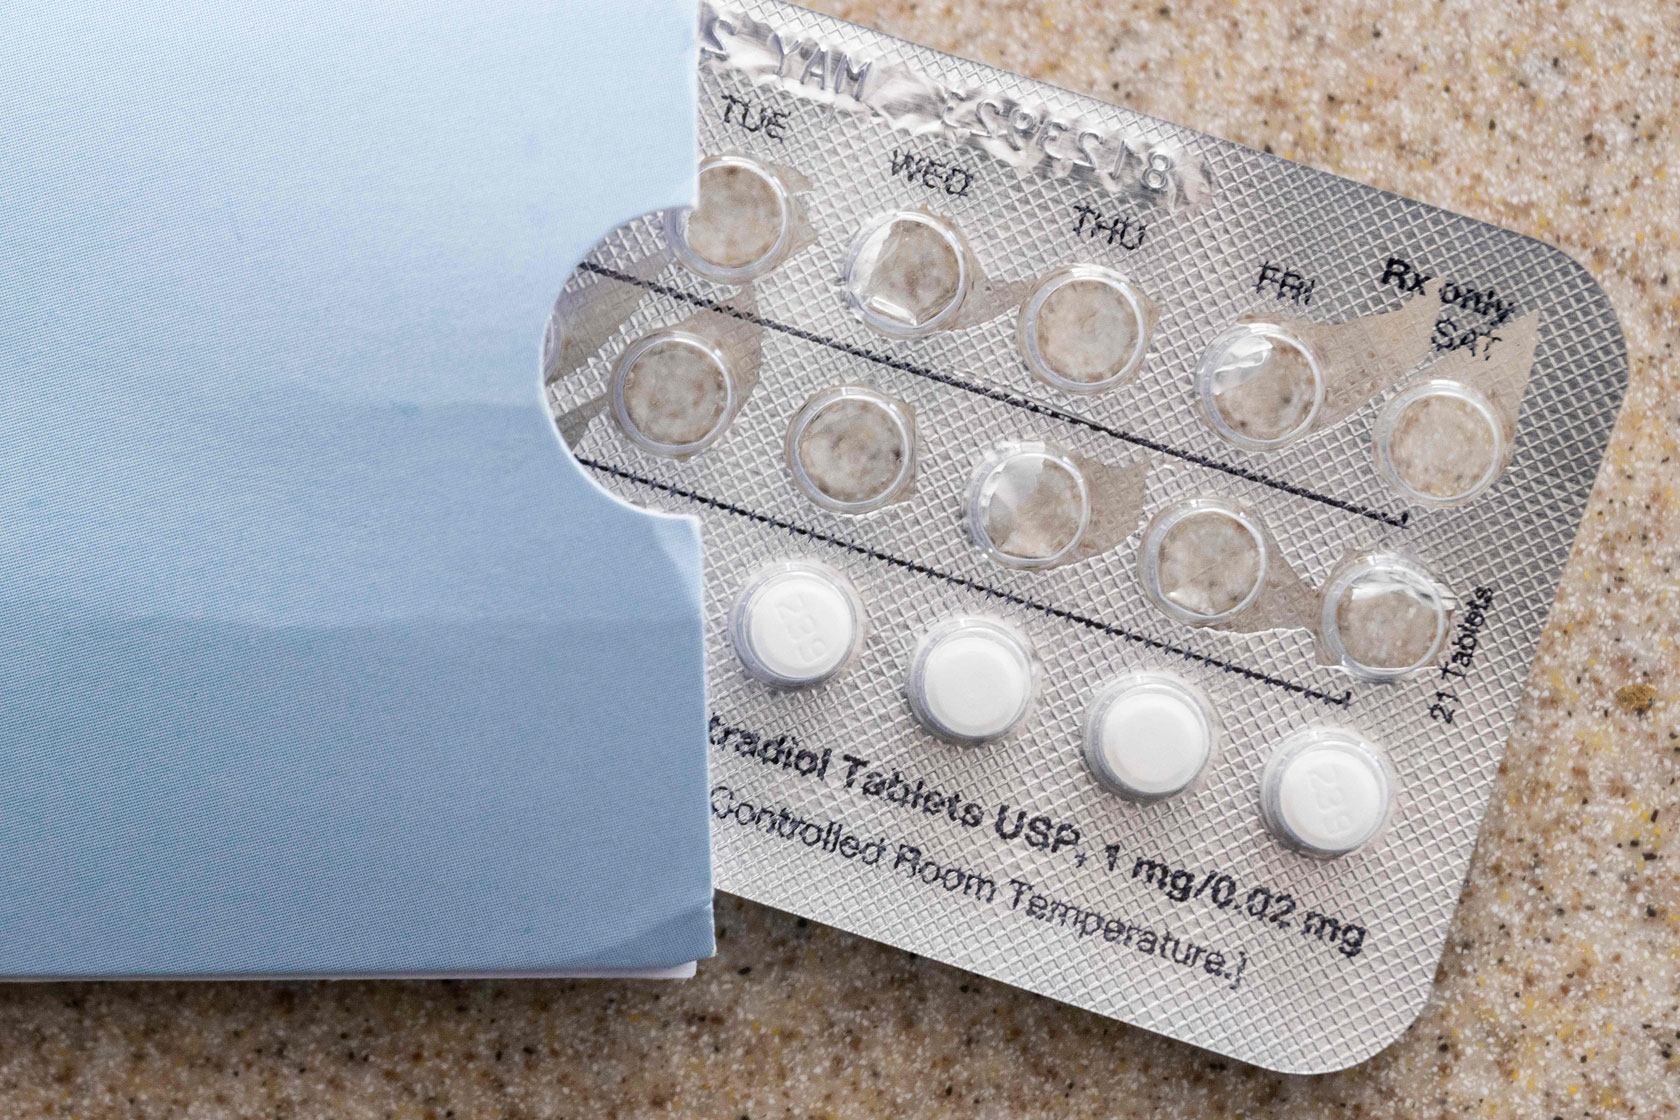 5 Important Facts About Over-the-Counter Birth Control Pills - Center for  American Progress